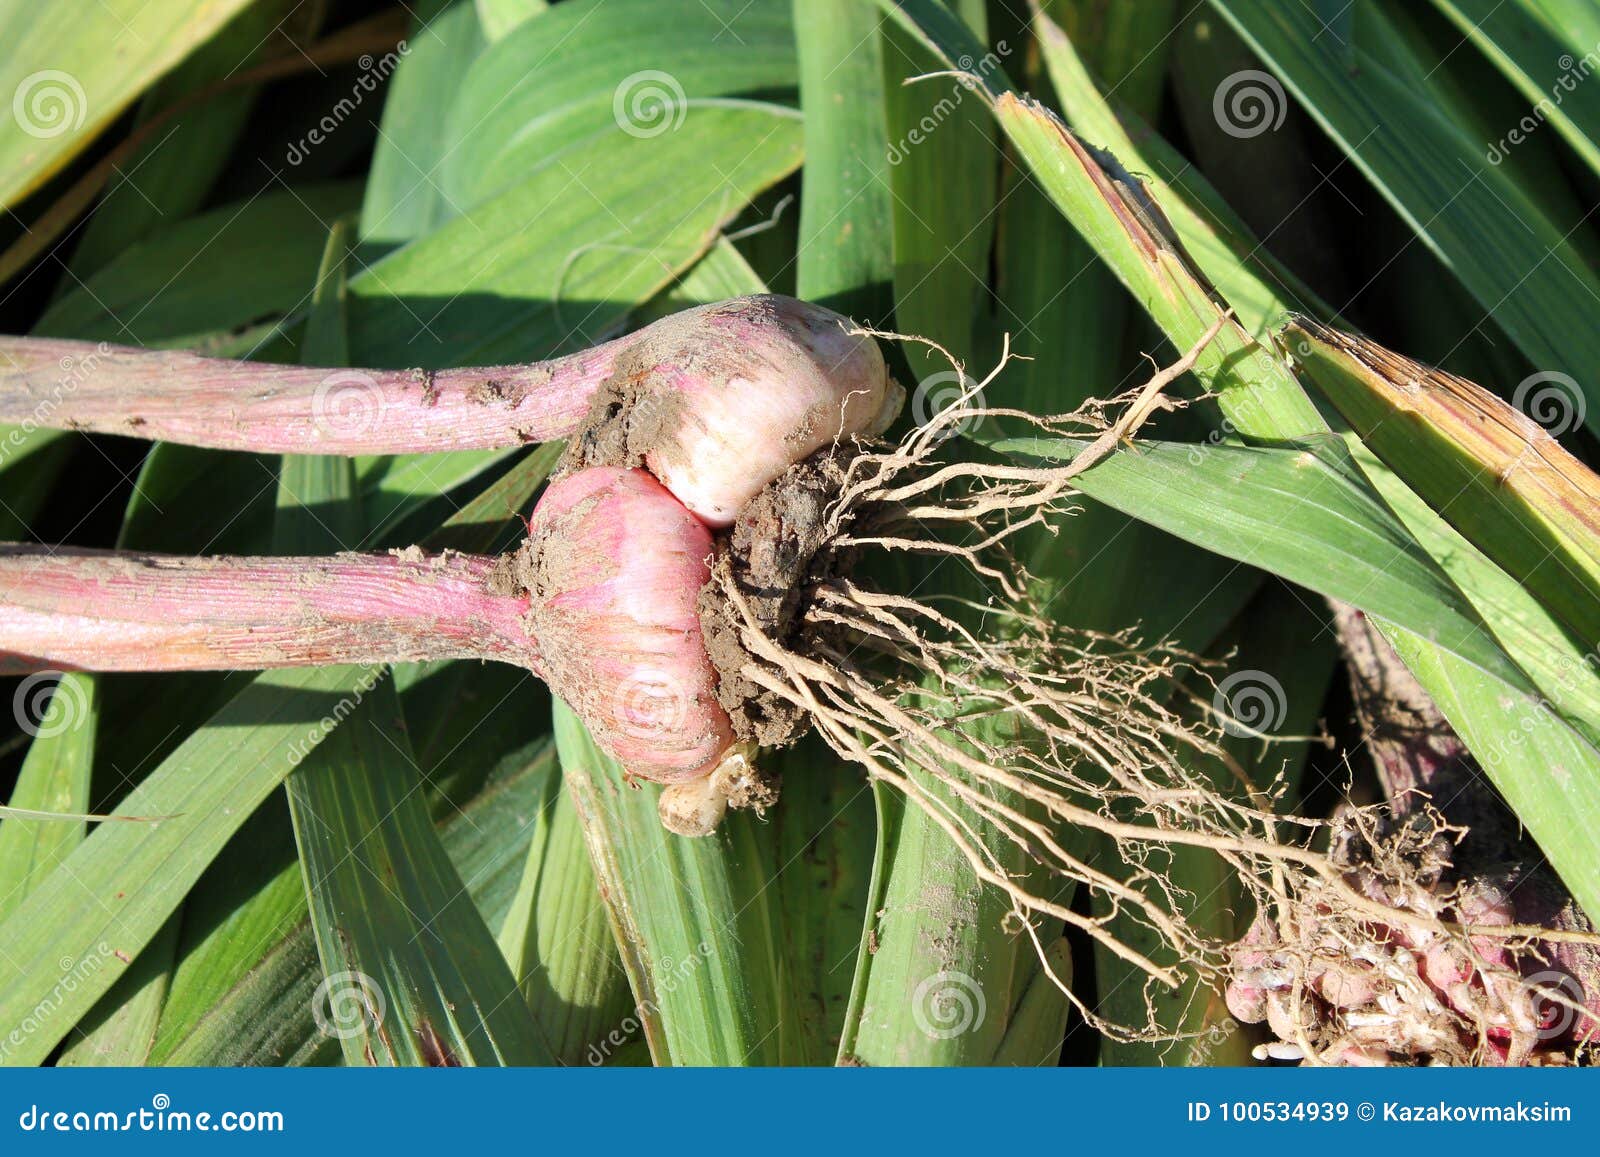 freshly dug gladiolus corm with roots